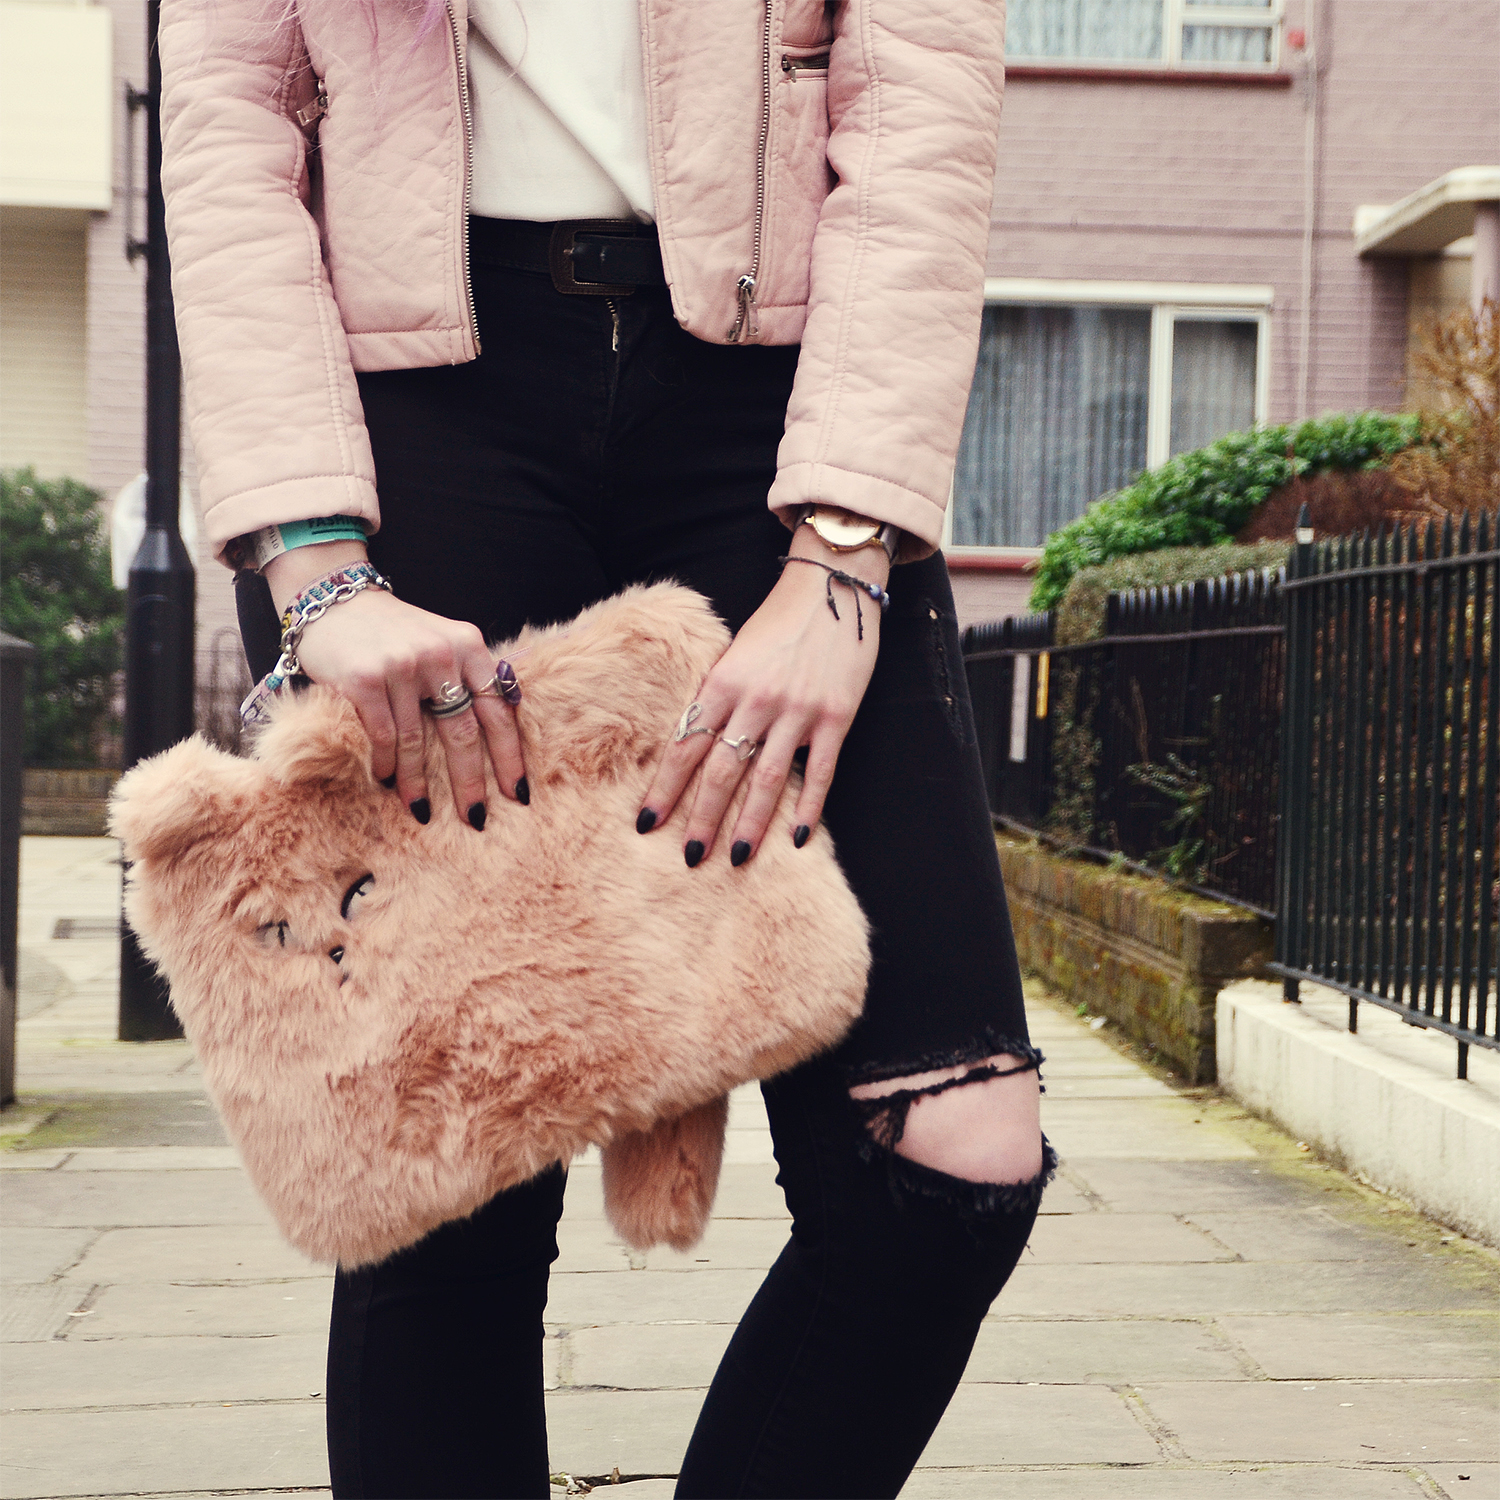 Stephi LaReine// UK Lifestyle Blogger at London Fashion Week: Day Three, Outfit: Pastel pink leather jacket // Primark White pussycat bow blouse shirt * // CN Direct Black ripped jeans * // Quiz Clothing Pink Fluffy Cat Bag Purse // New Look Beige Chunky Platform Brogues * // The Style Edit Watch // Olivia Burton Rings * // Black Moon, Lilac Moon, Story, Pretty Attitude